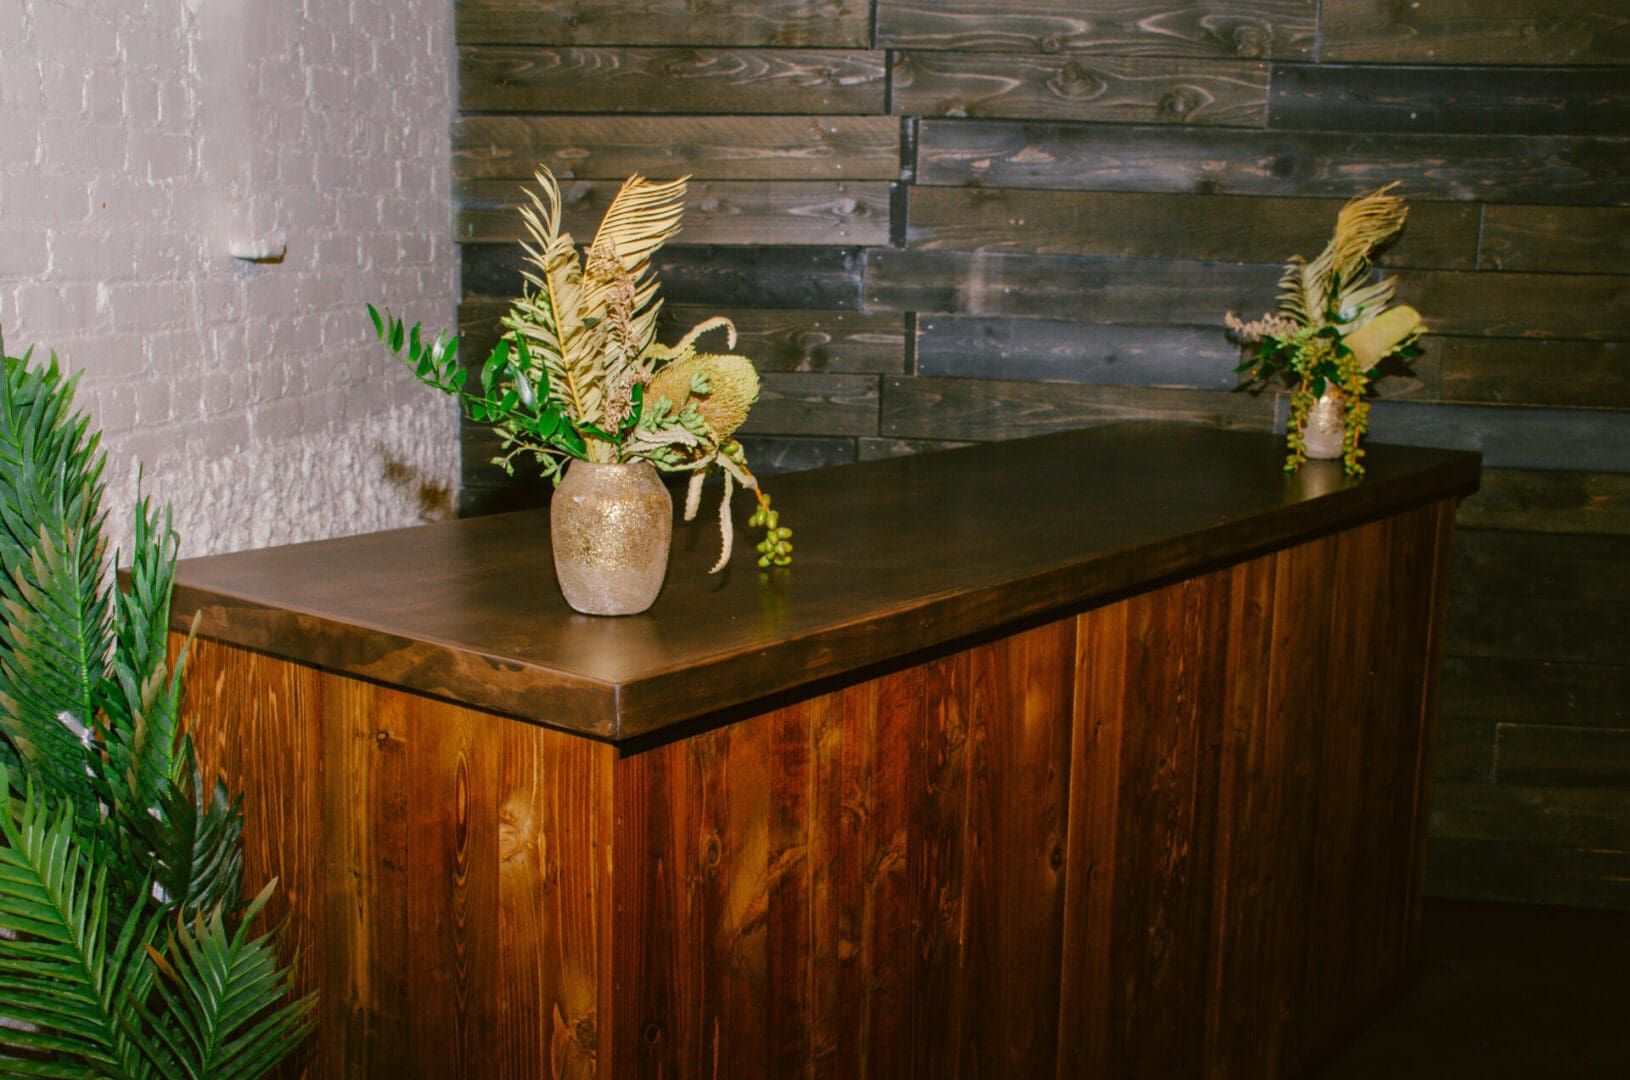 Peak Wooden Bar adorned with floral arrangements in a rustic style interior.